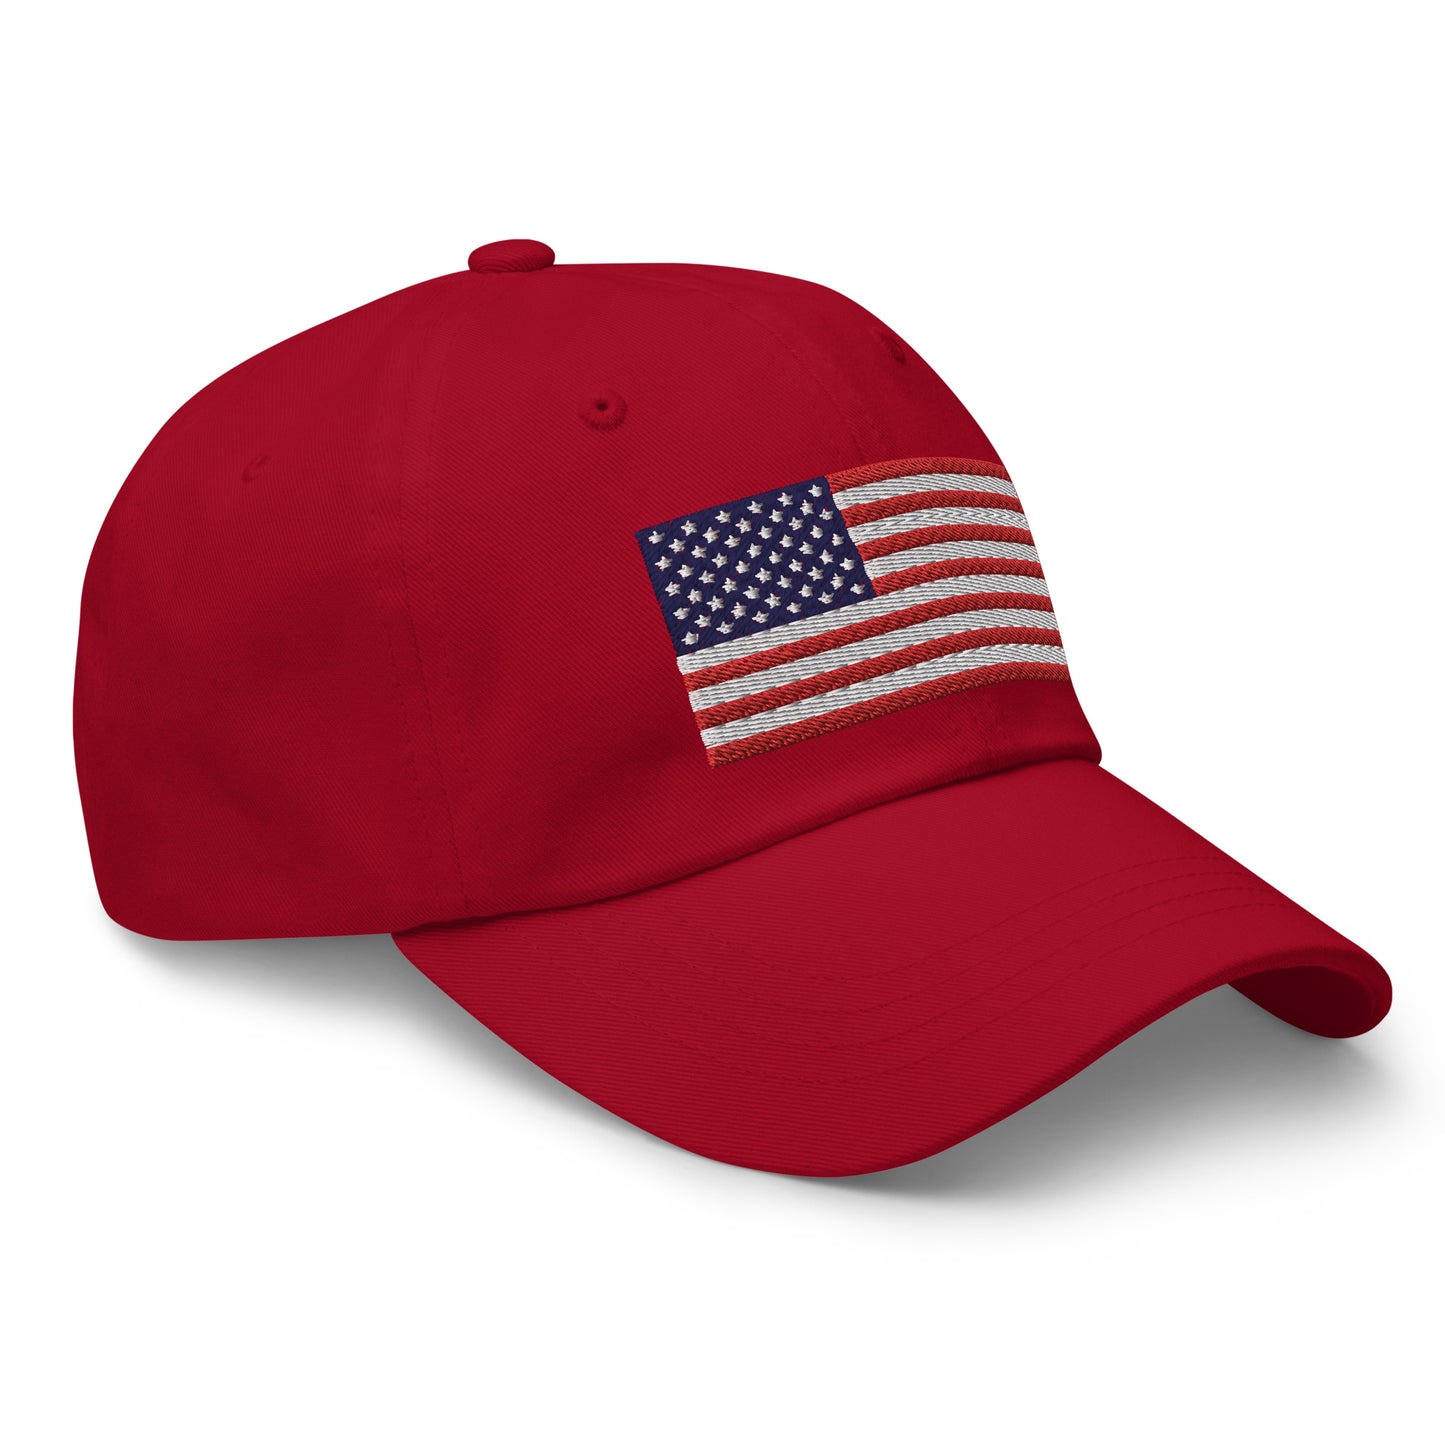 Everyday wear embroidered USA dad hat, adjustable and red color.